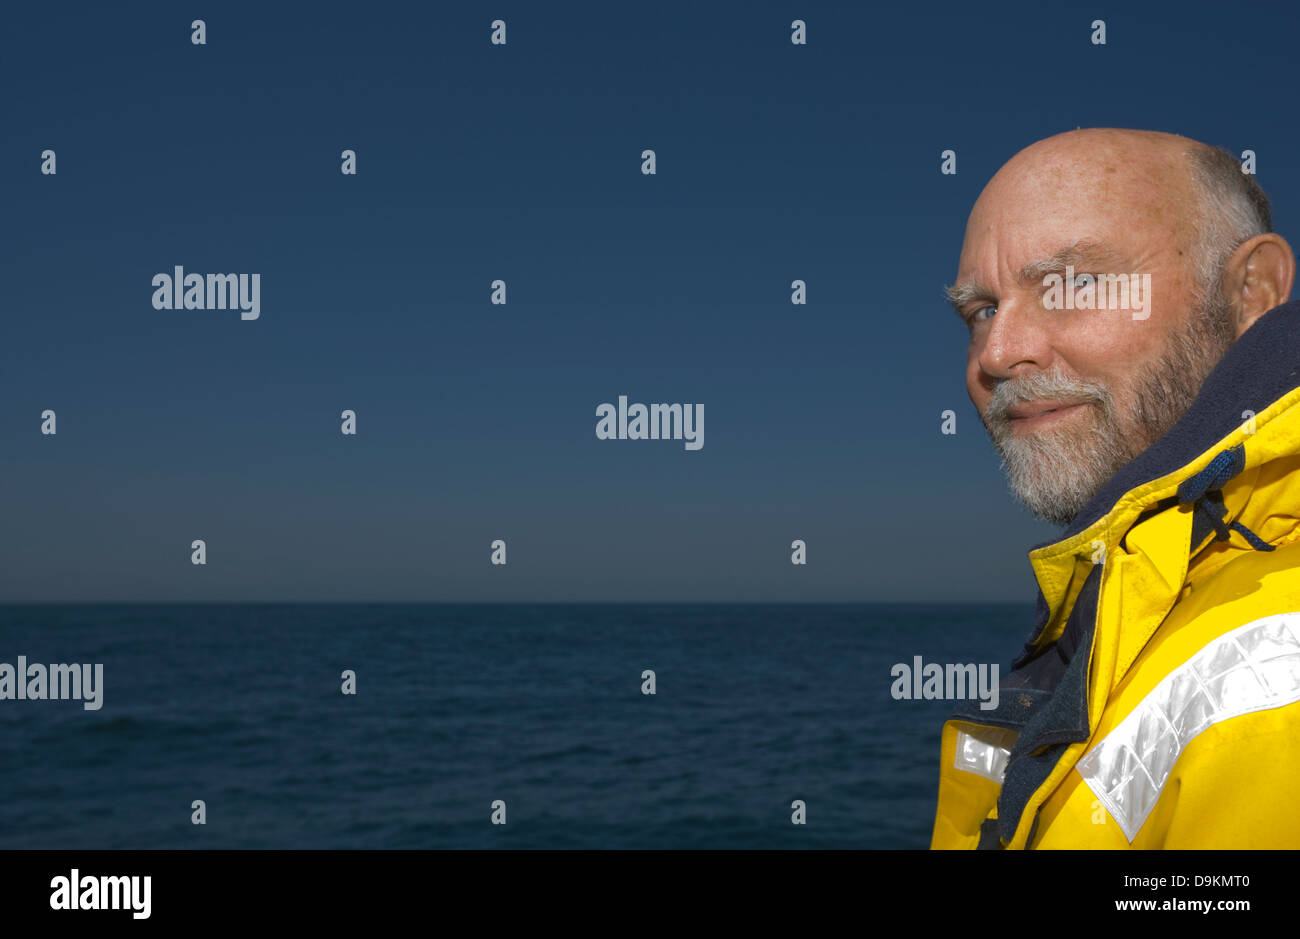 SAN DIEGO, CA – APRIL 19: Dr. Craig Venter on his Sail Boat in San Diego, California, U.S. on April 19, 2007. Stock Photo